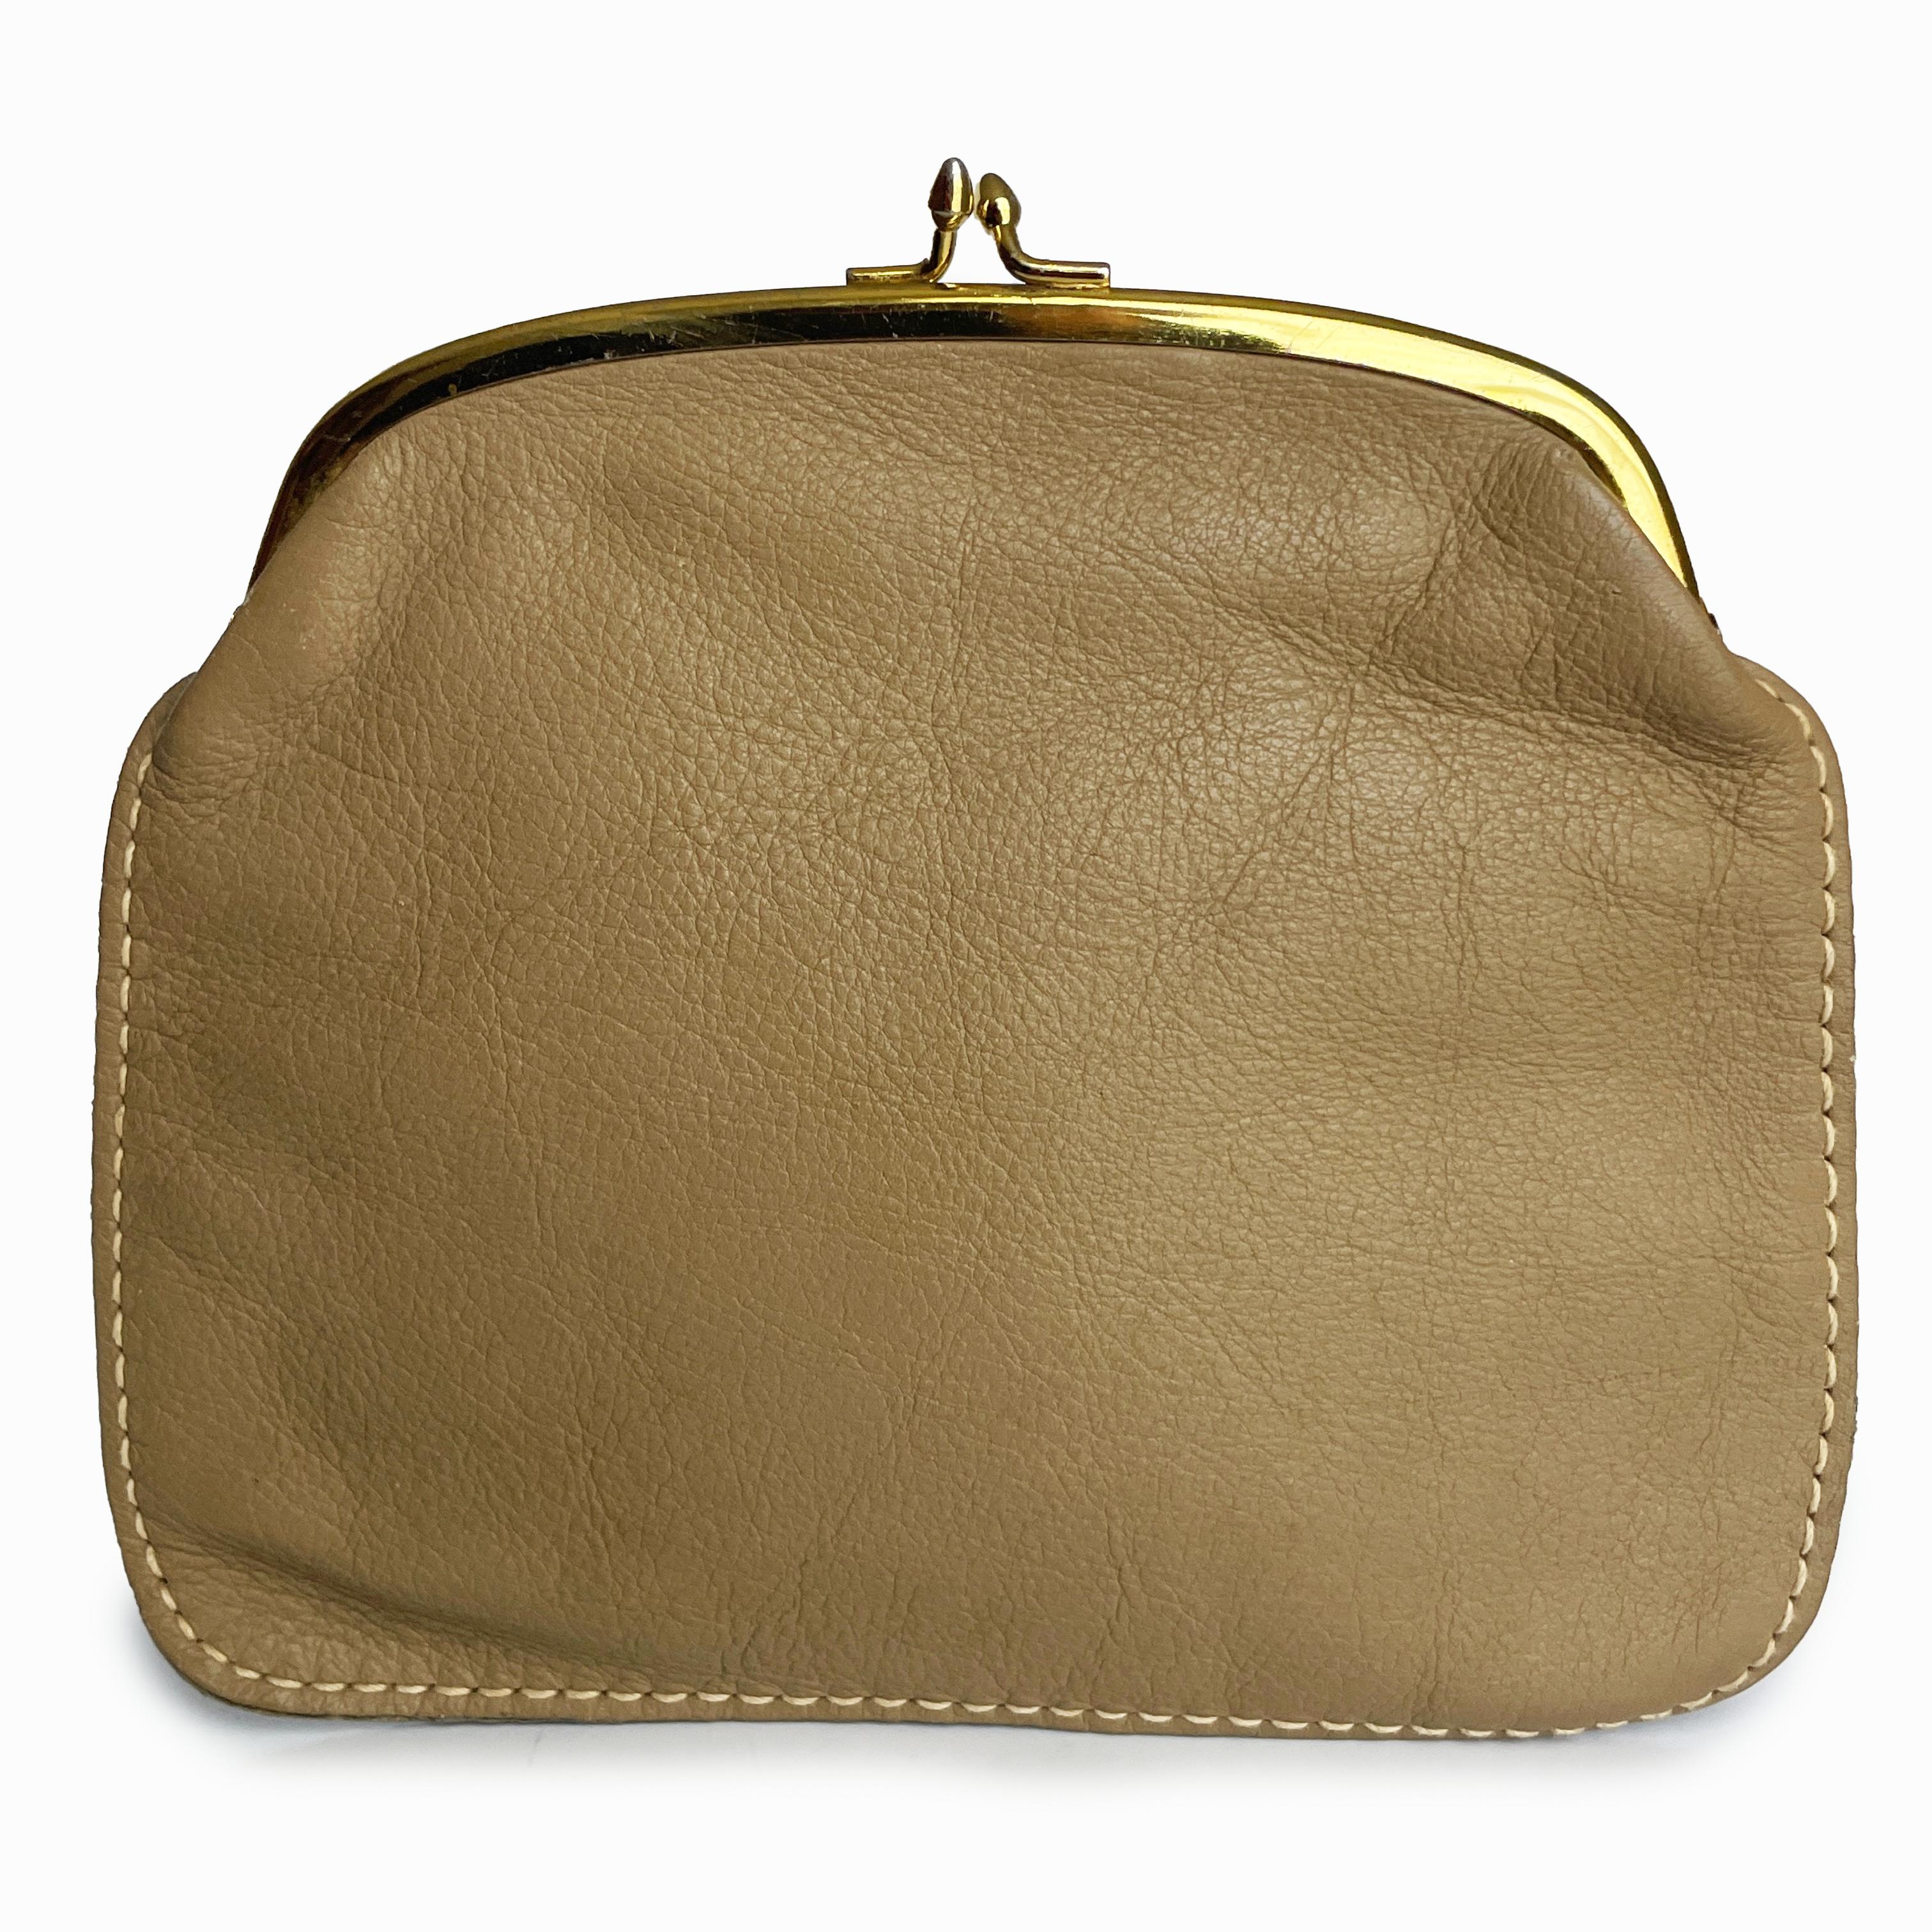 Bonnie Cashin for Coach 'foldover purse' or clutch bag, part of Bonnie's Cashin Carry accessories collection and likely made in the late 1960s.  Made from tan leather (which we believe was originally called 